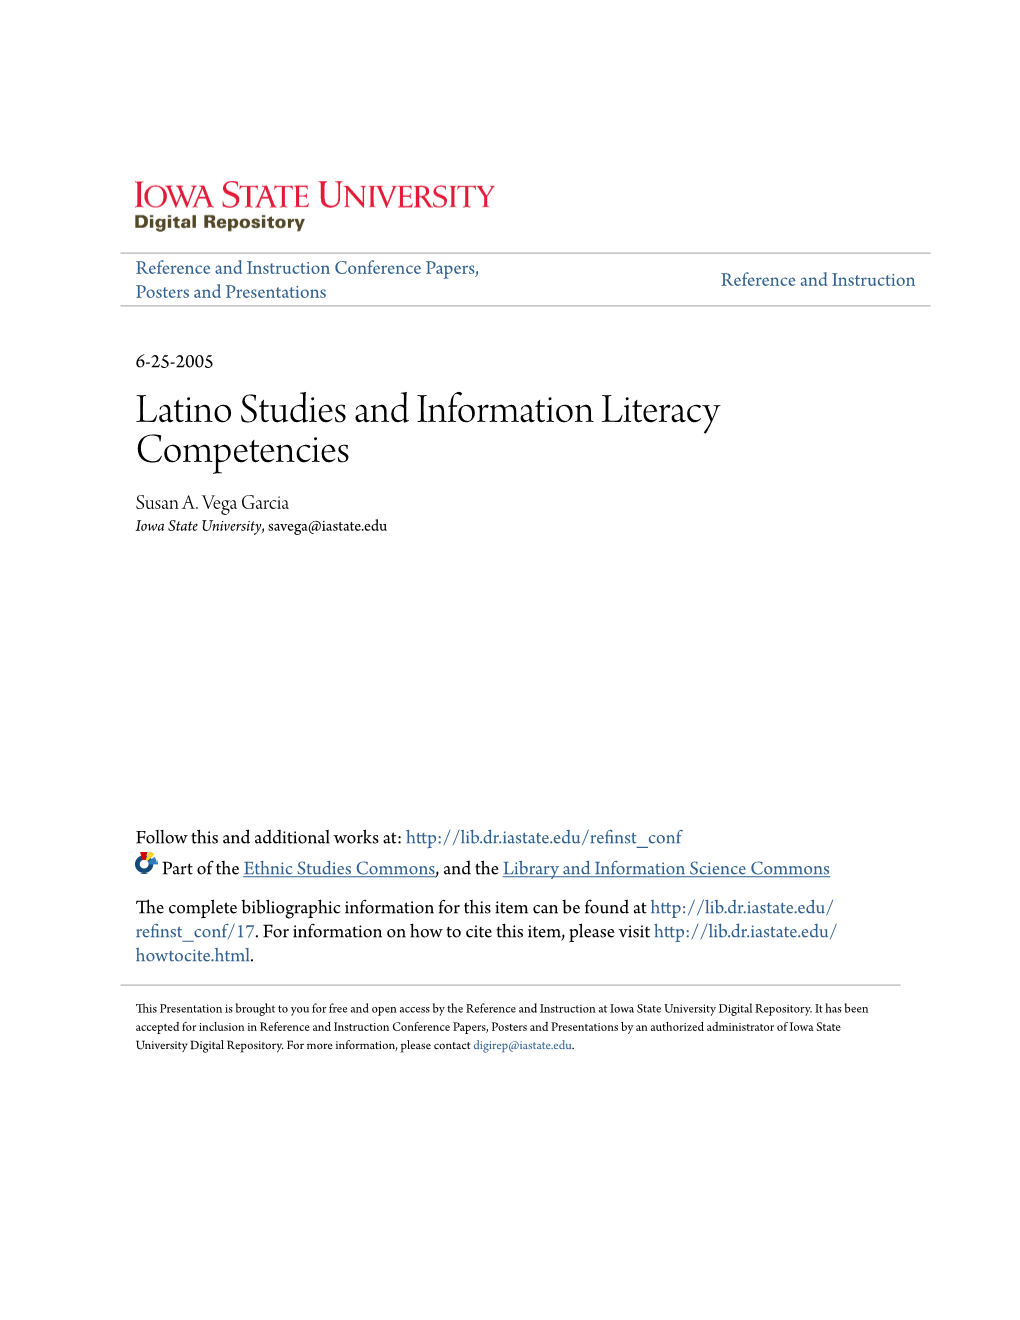 Latino Studies and Information Literacy Competencies Susan A